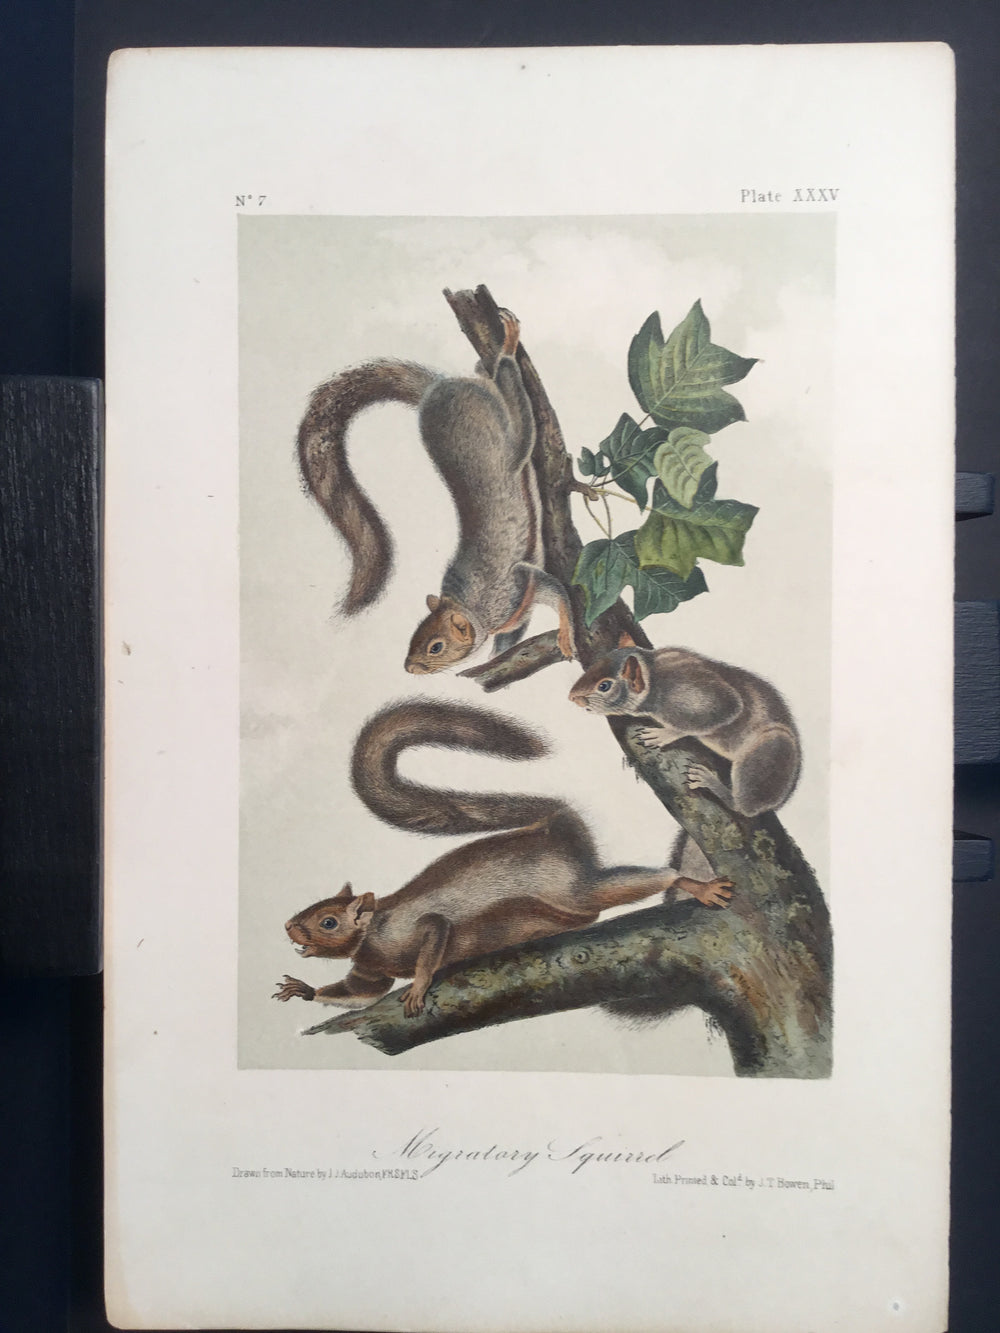 Lord-Hopkins Collection - Migratory Squirrel